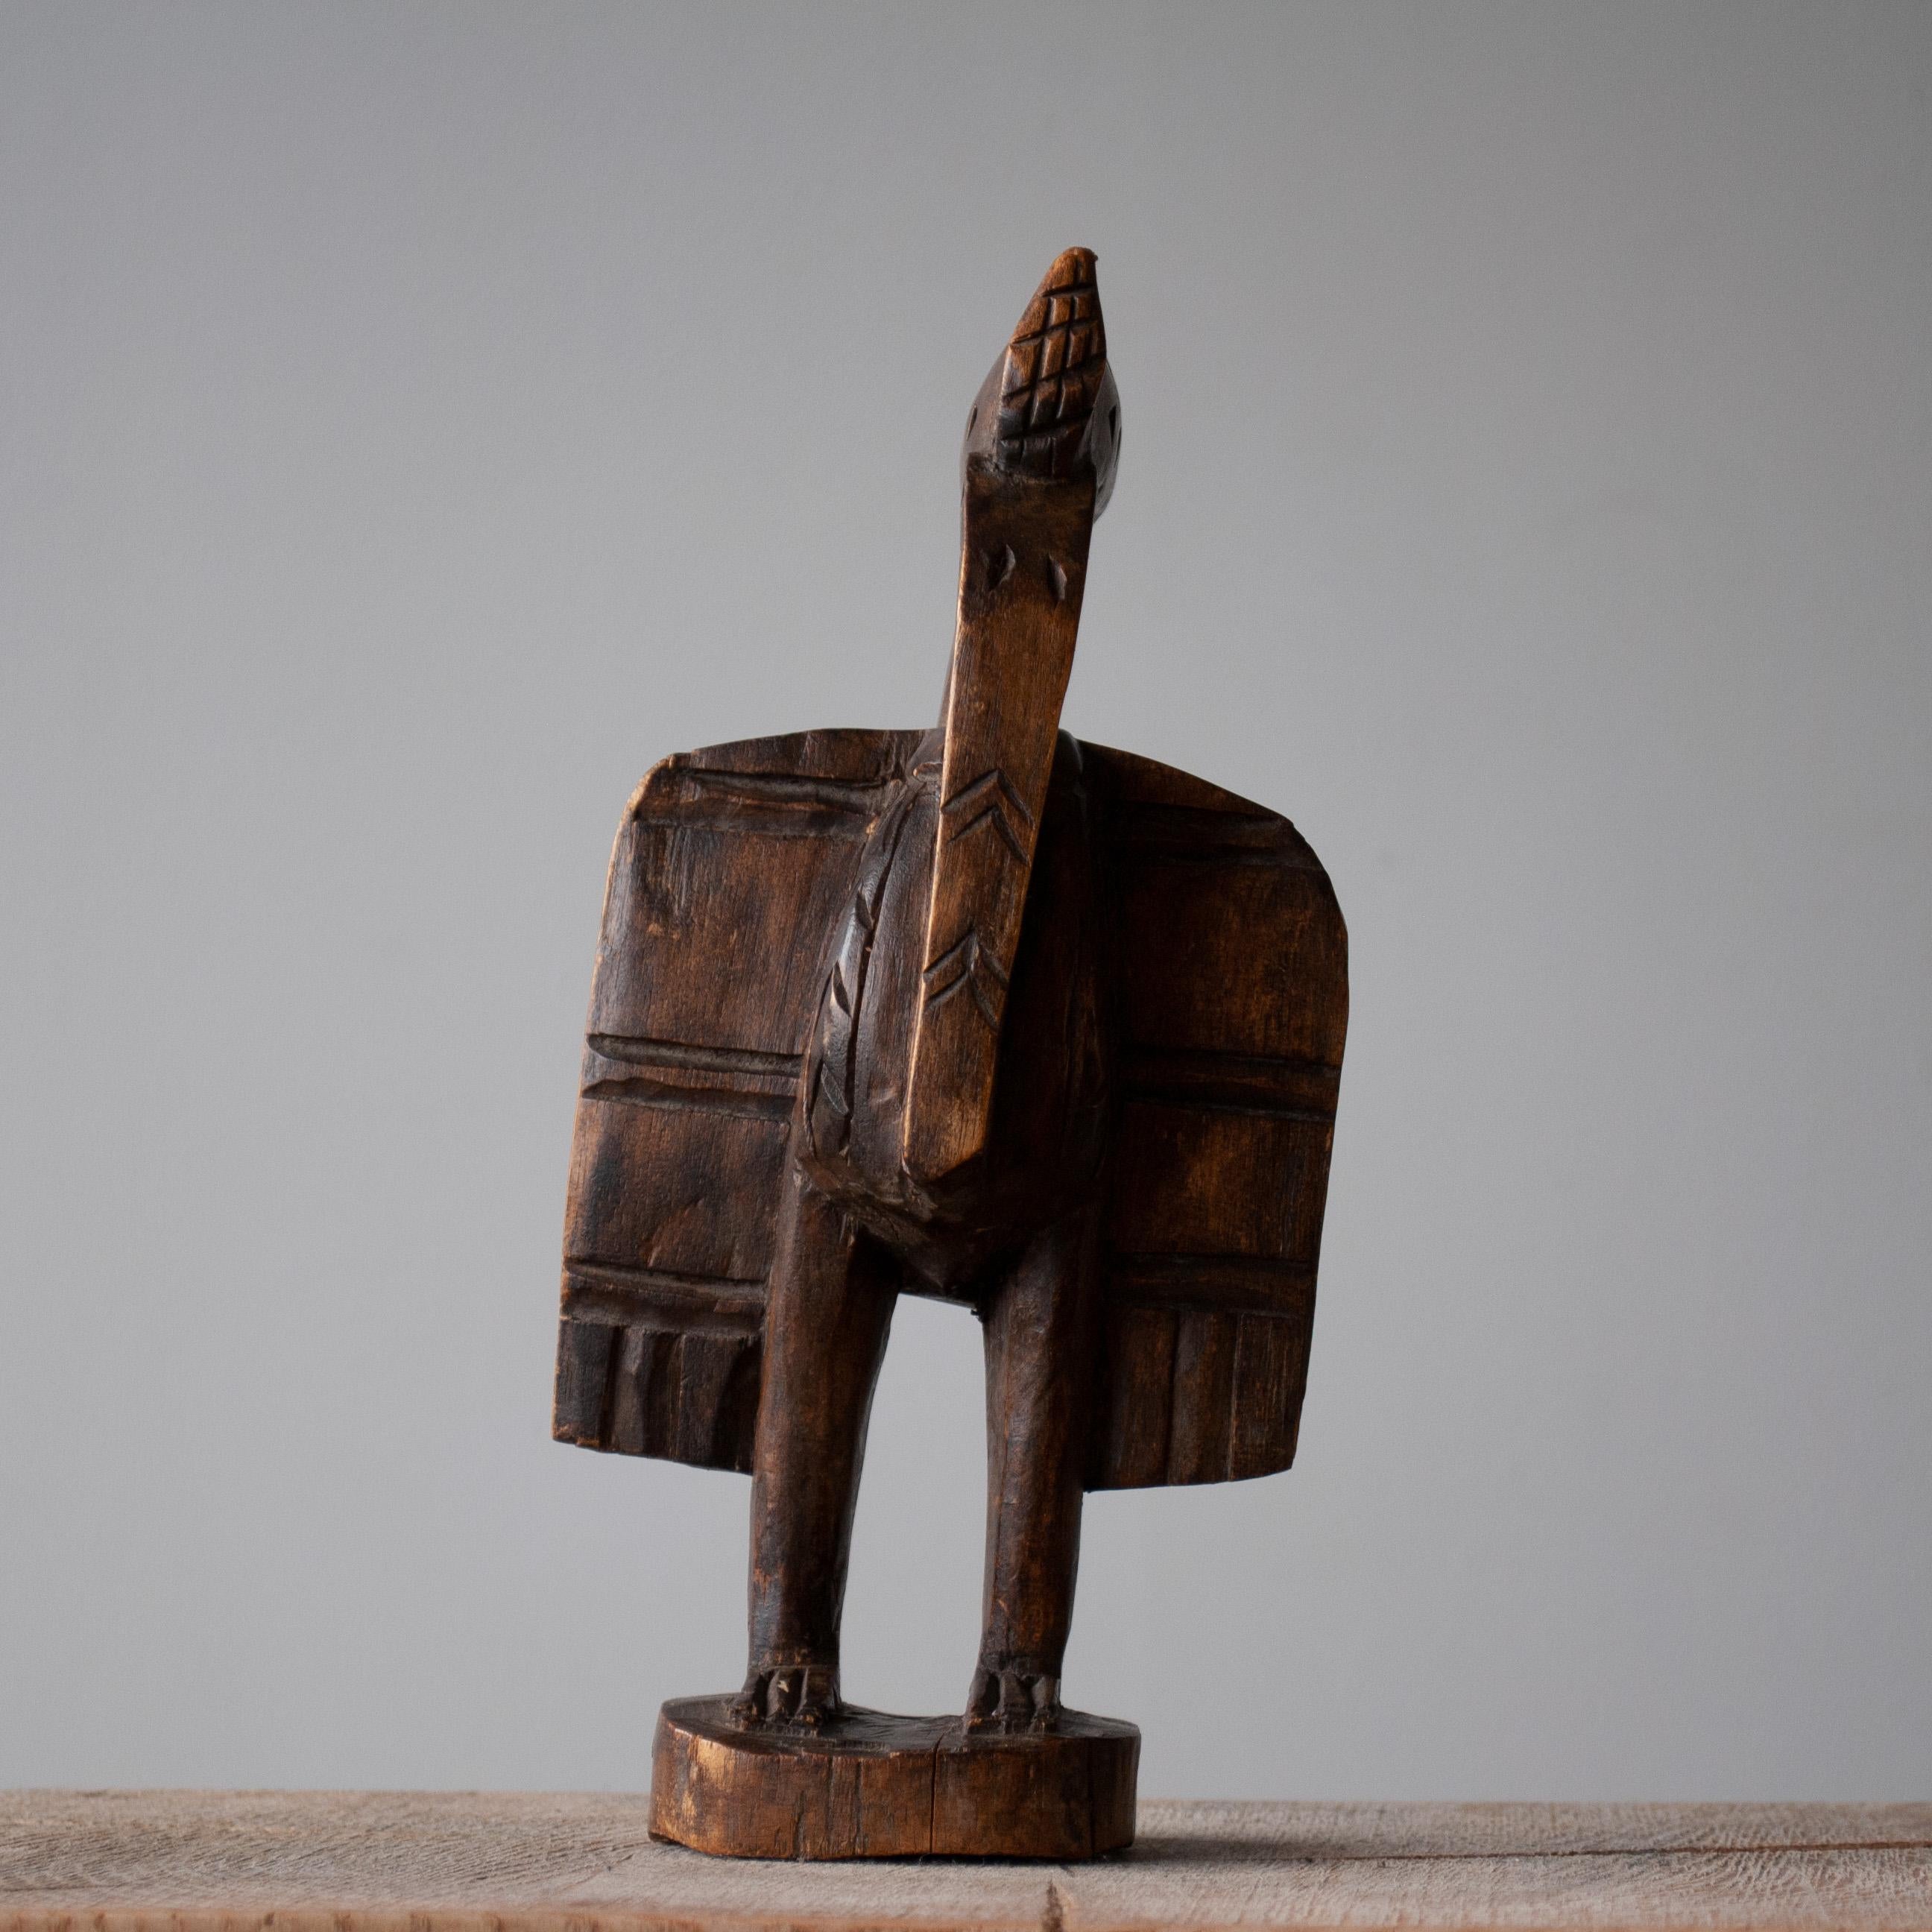 A lovely little hand carved Senufo Sejen bird sculpture from the early to mid 20th century, Africa, Ivory Coast.